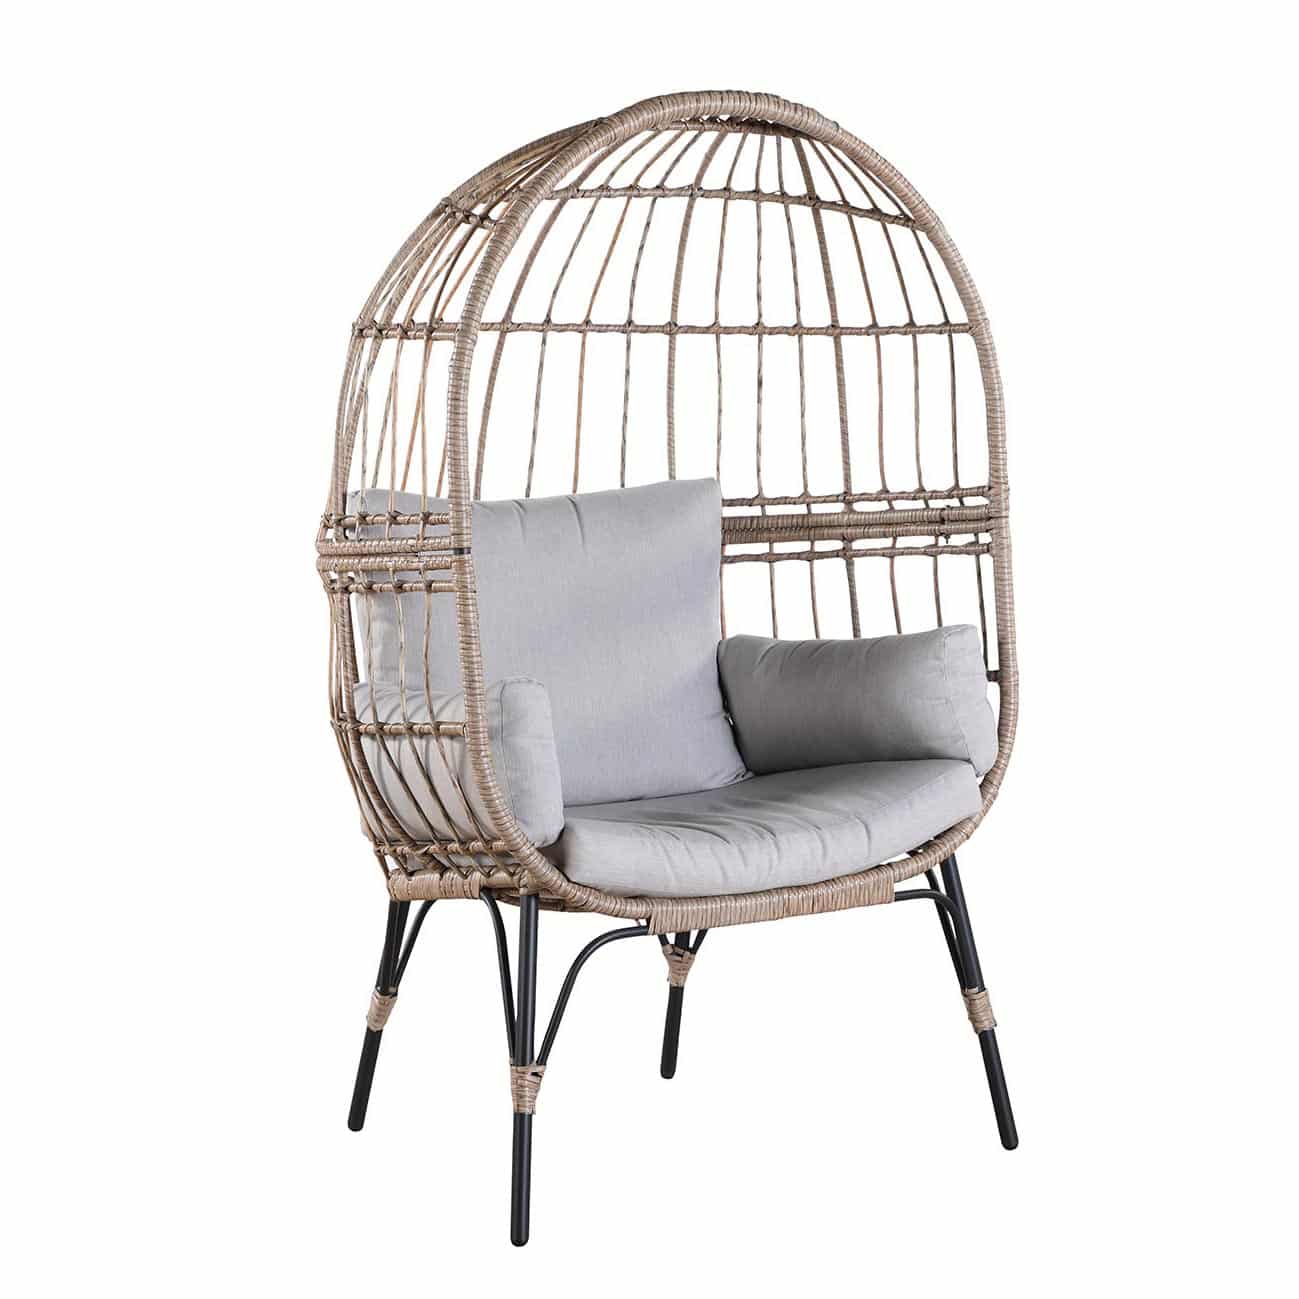 Egg chair for bedroom OD679 - Outdoor Furniture Supplier